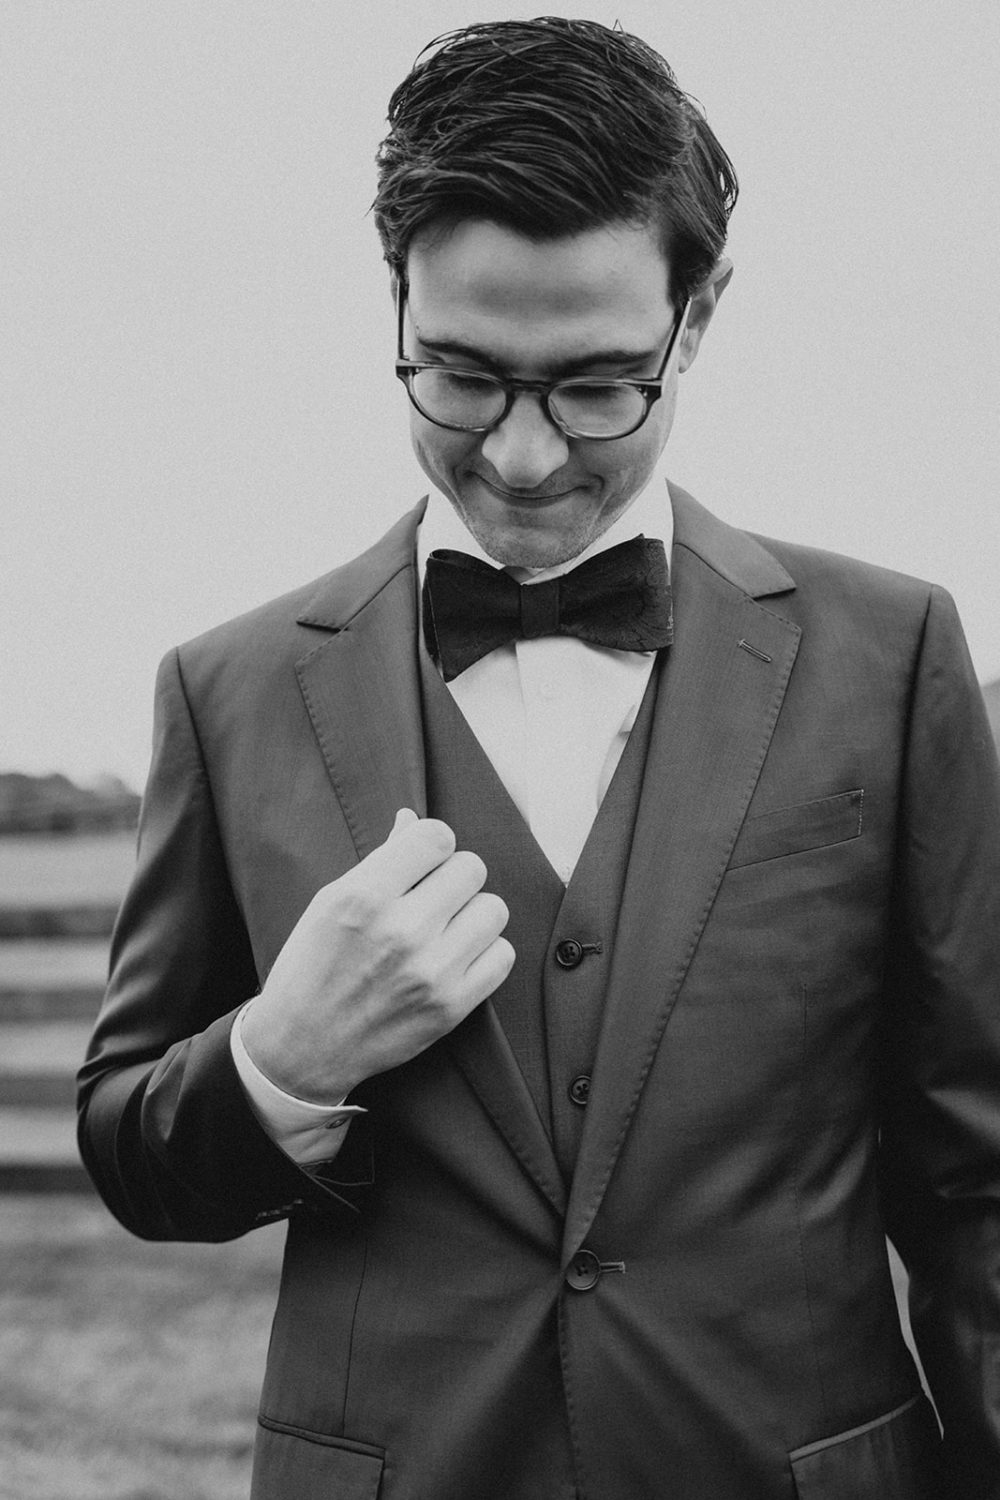 groom holds suit jacket during wedding getting ready